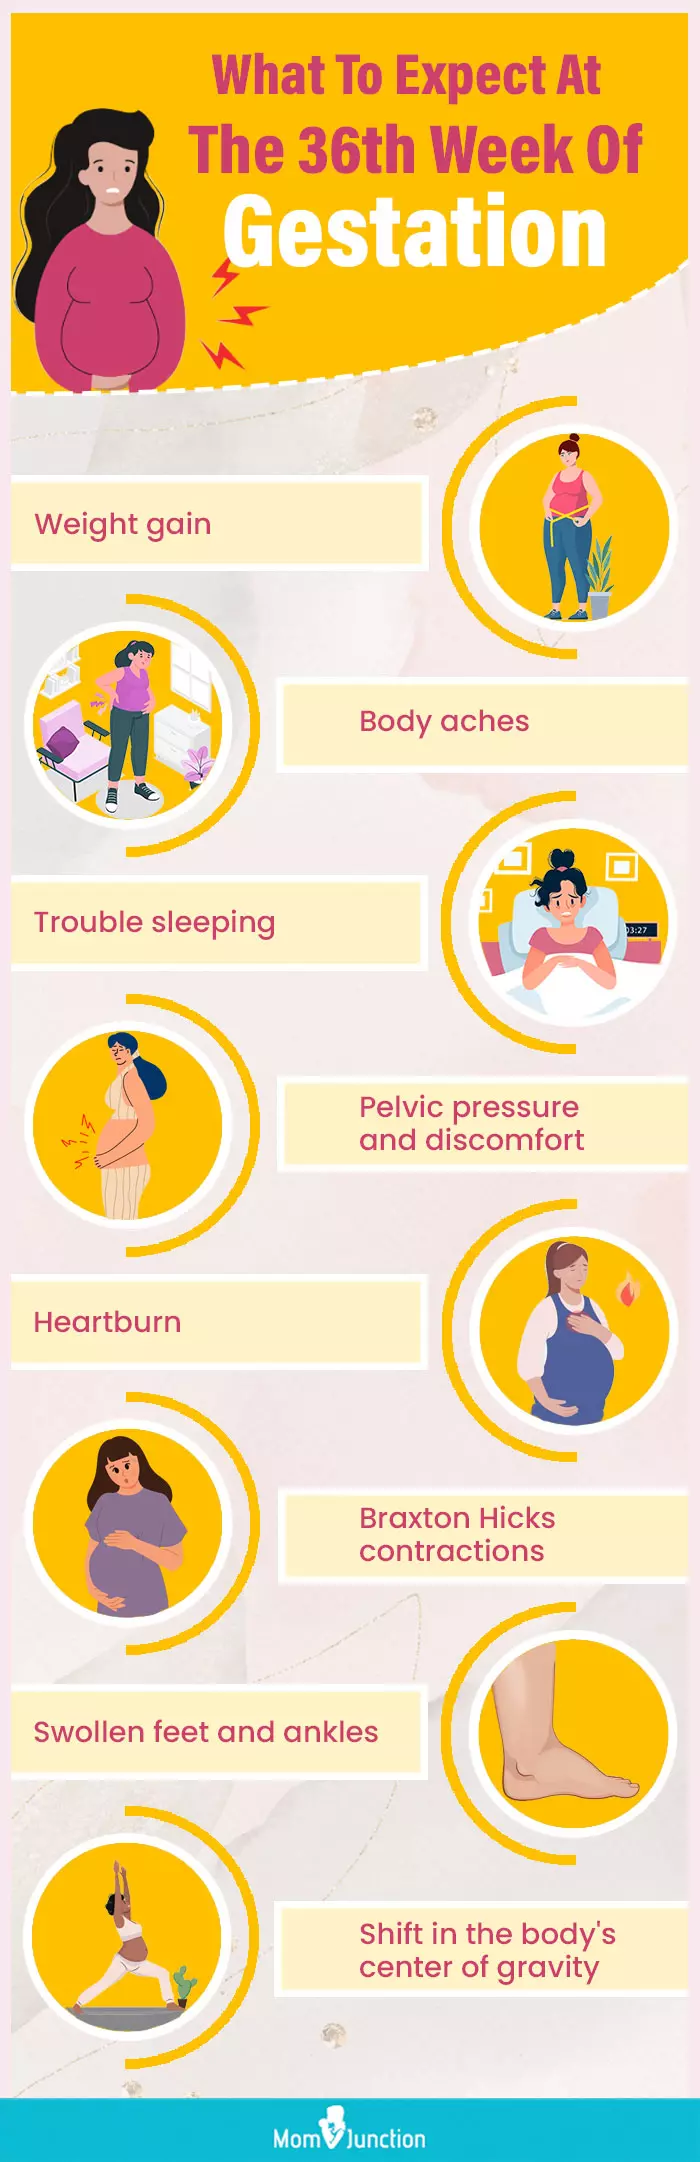 what to expect at the 36th week of gestation (infographic)